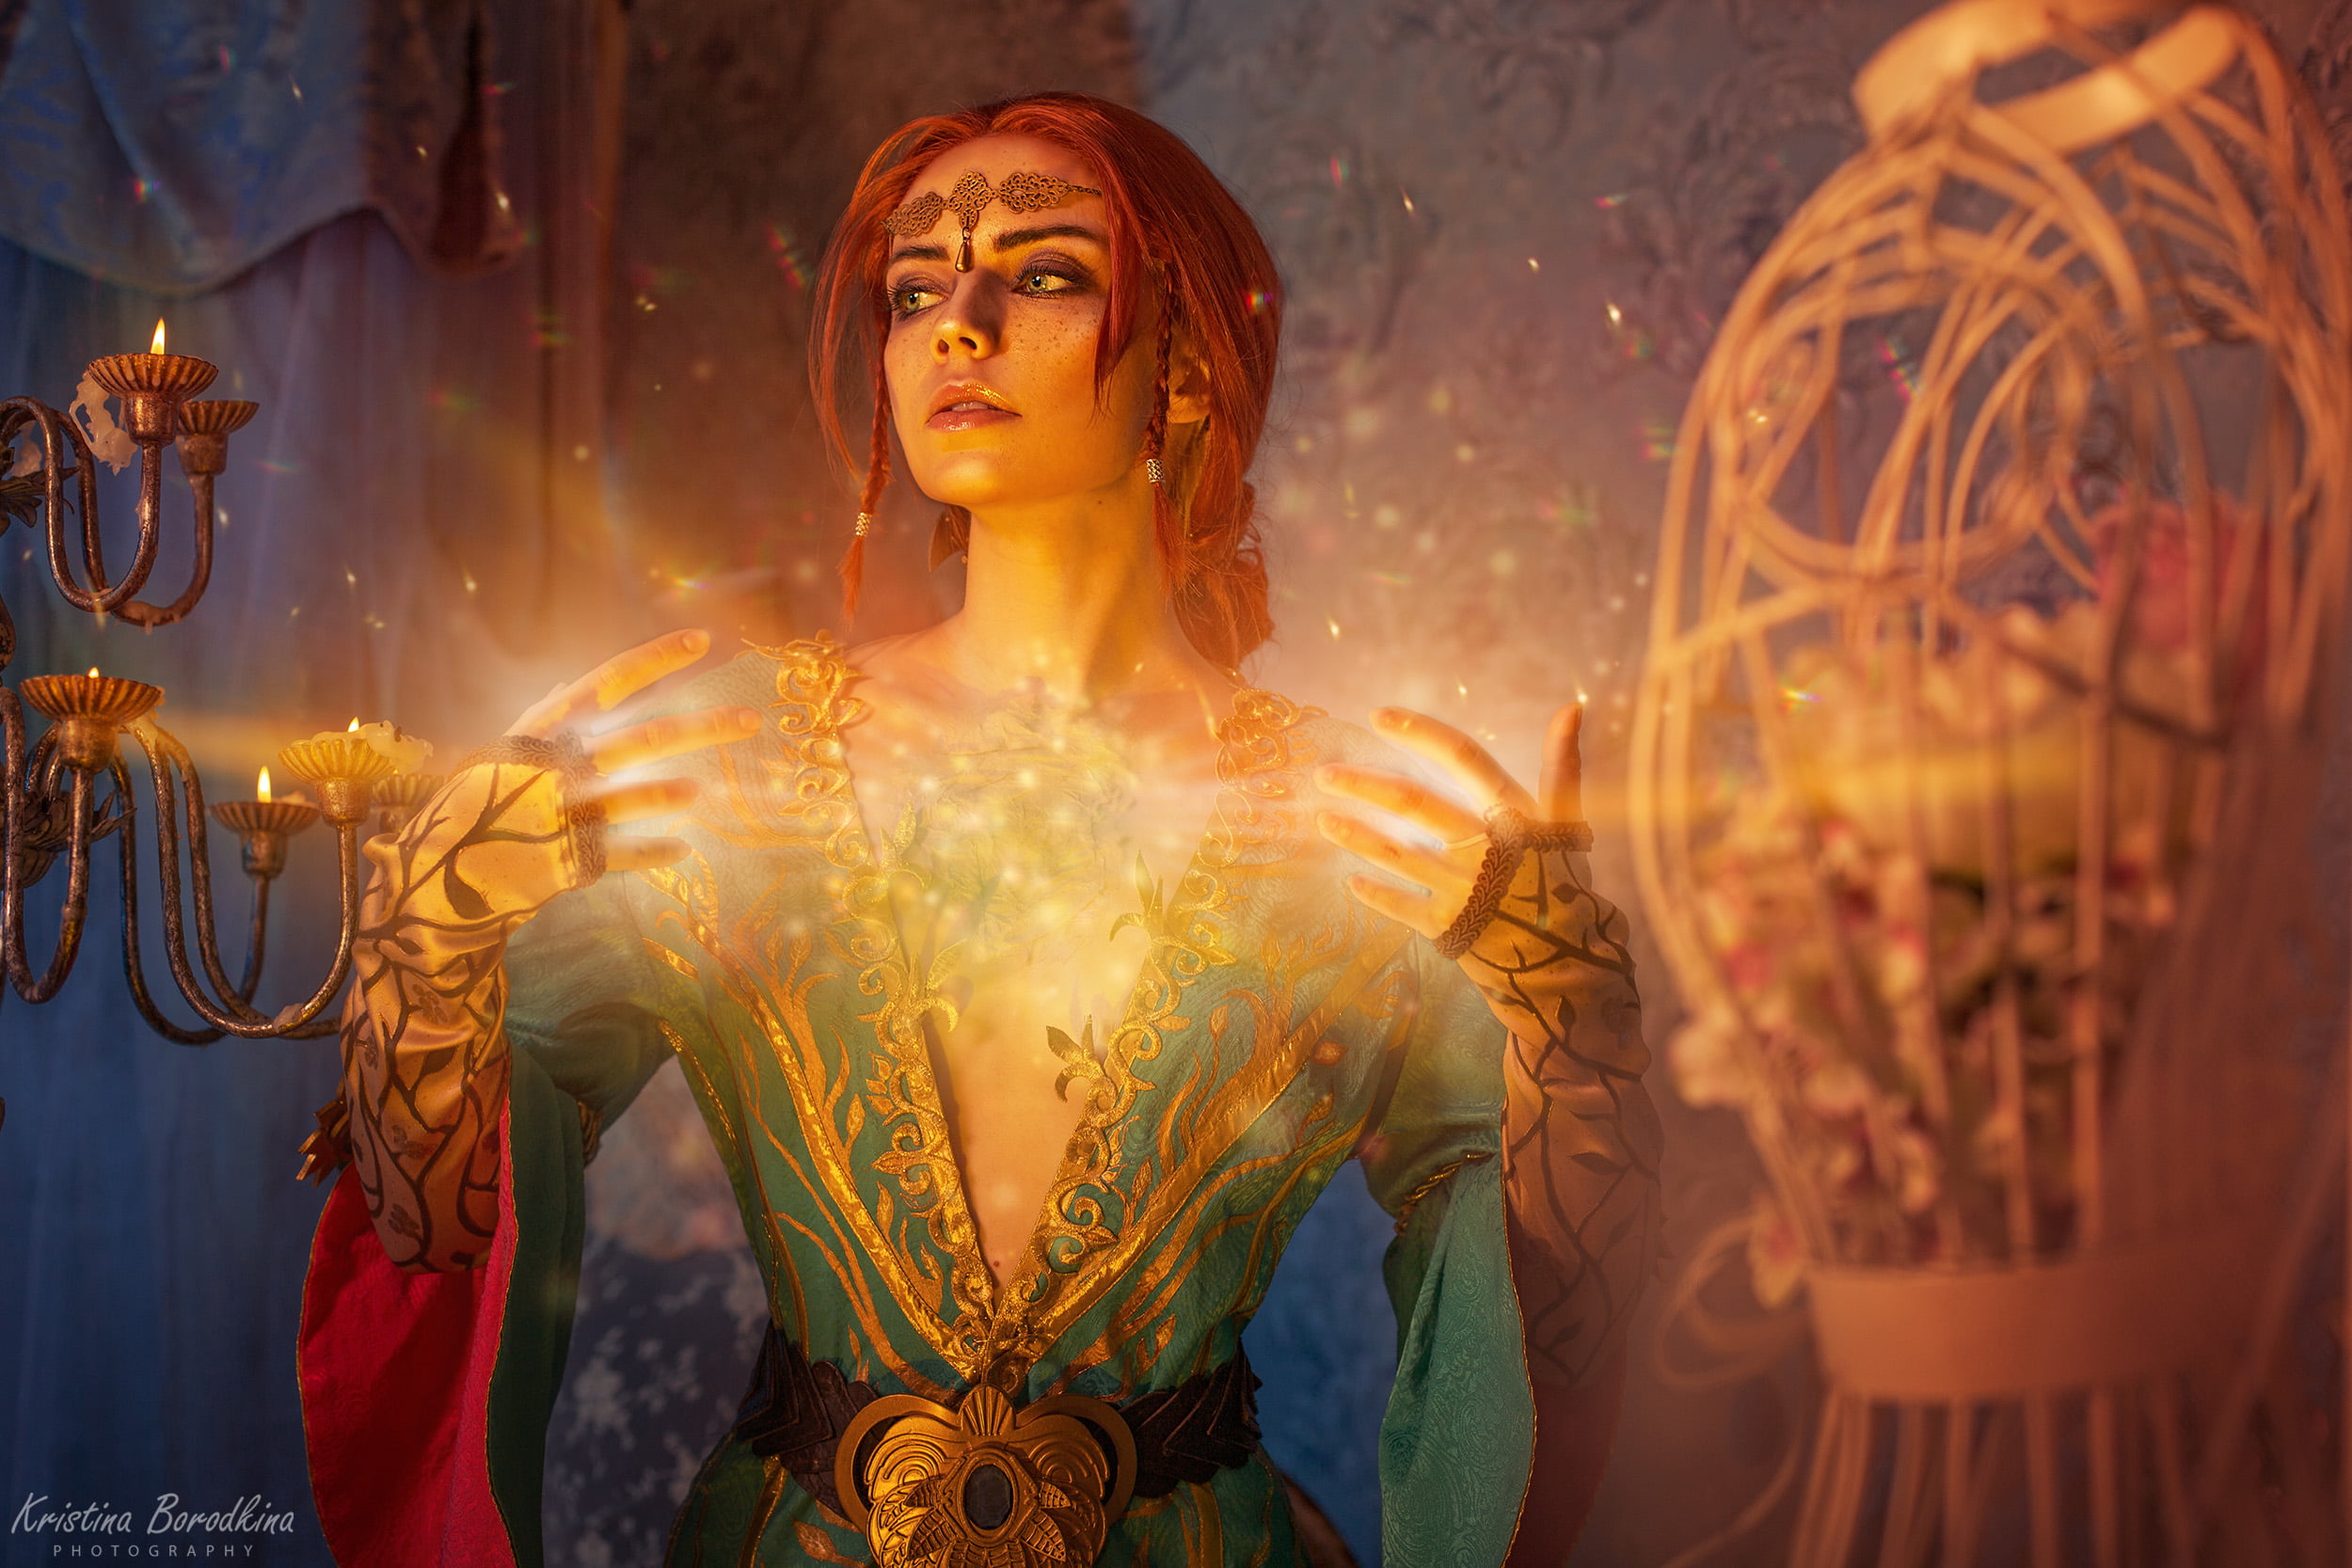 Triss Merigold, The Witcher, The Witcher 3: Wild Hunt, video games